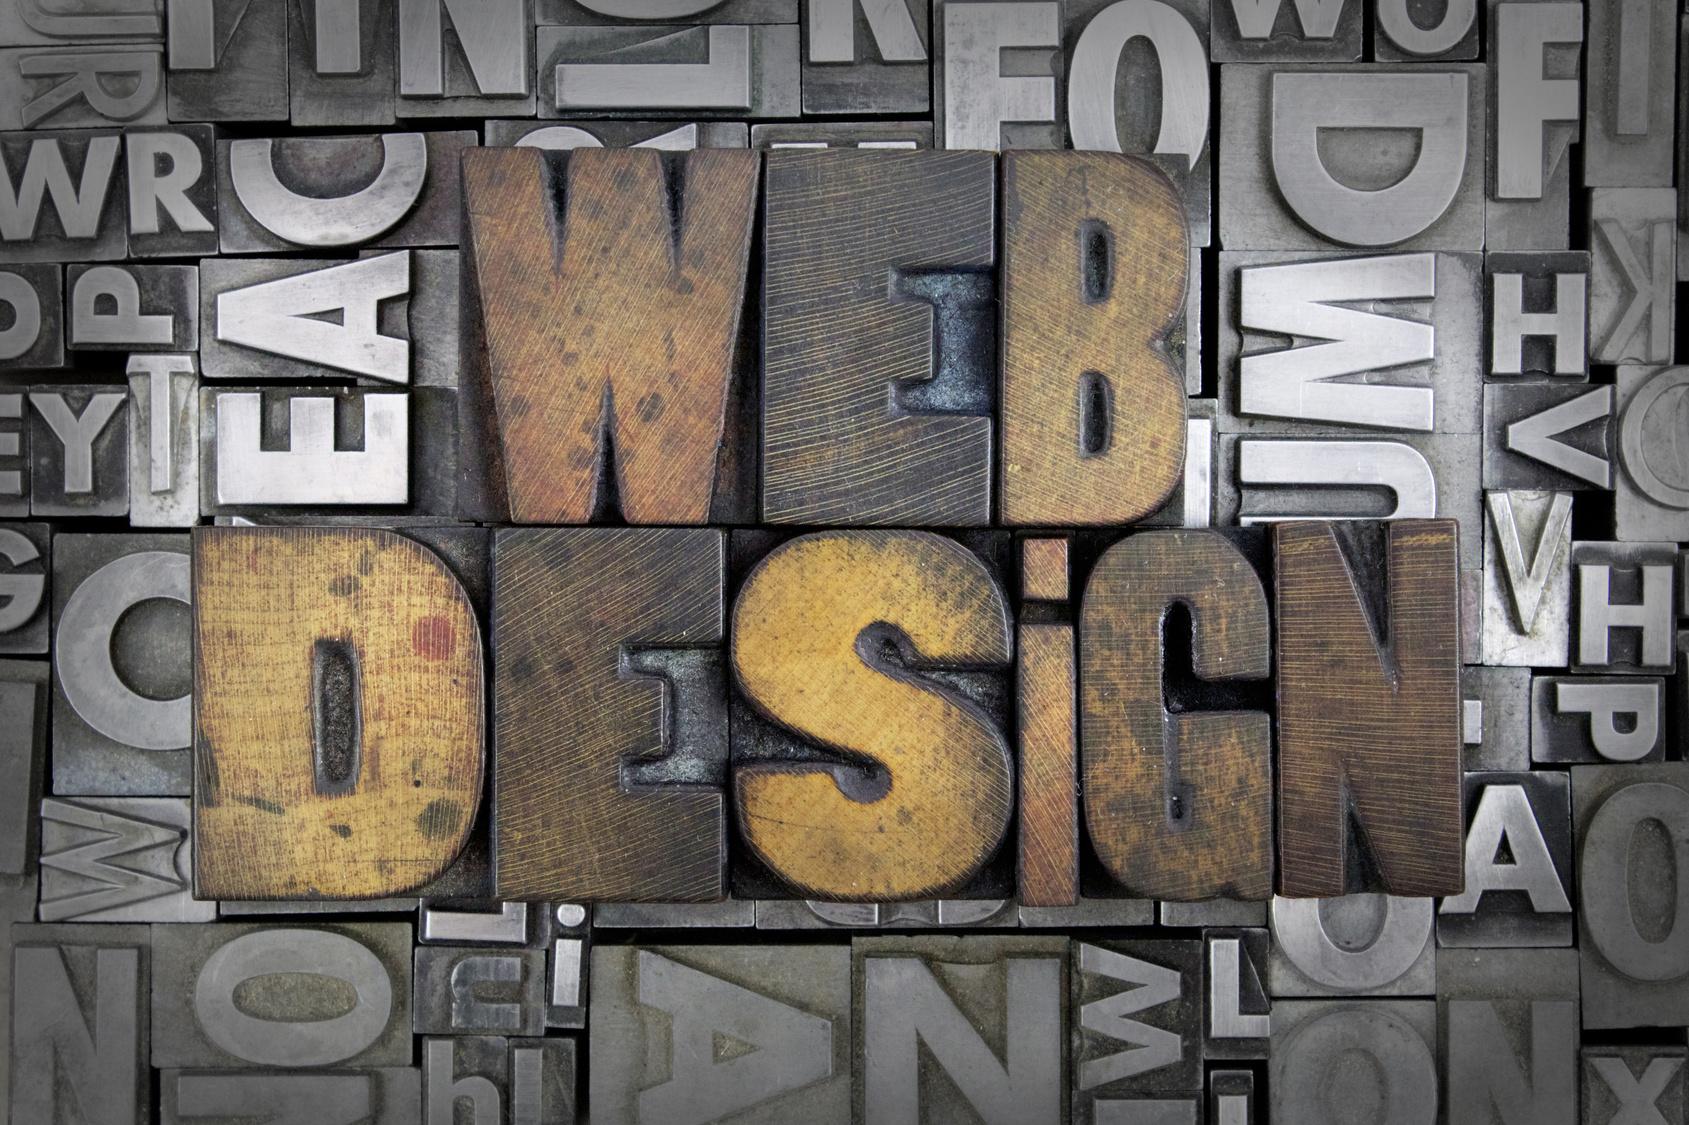 Finding The Right Web Design Agency